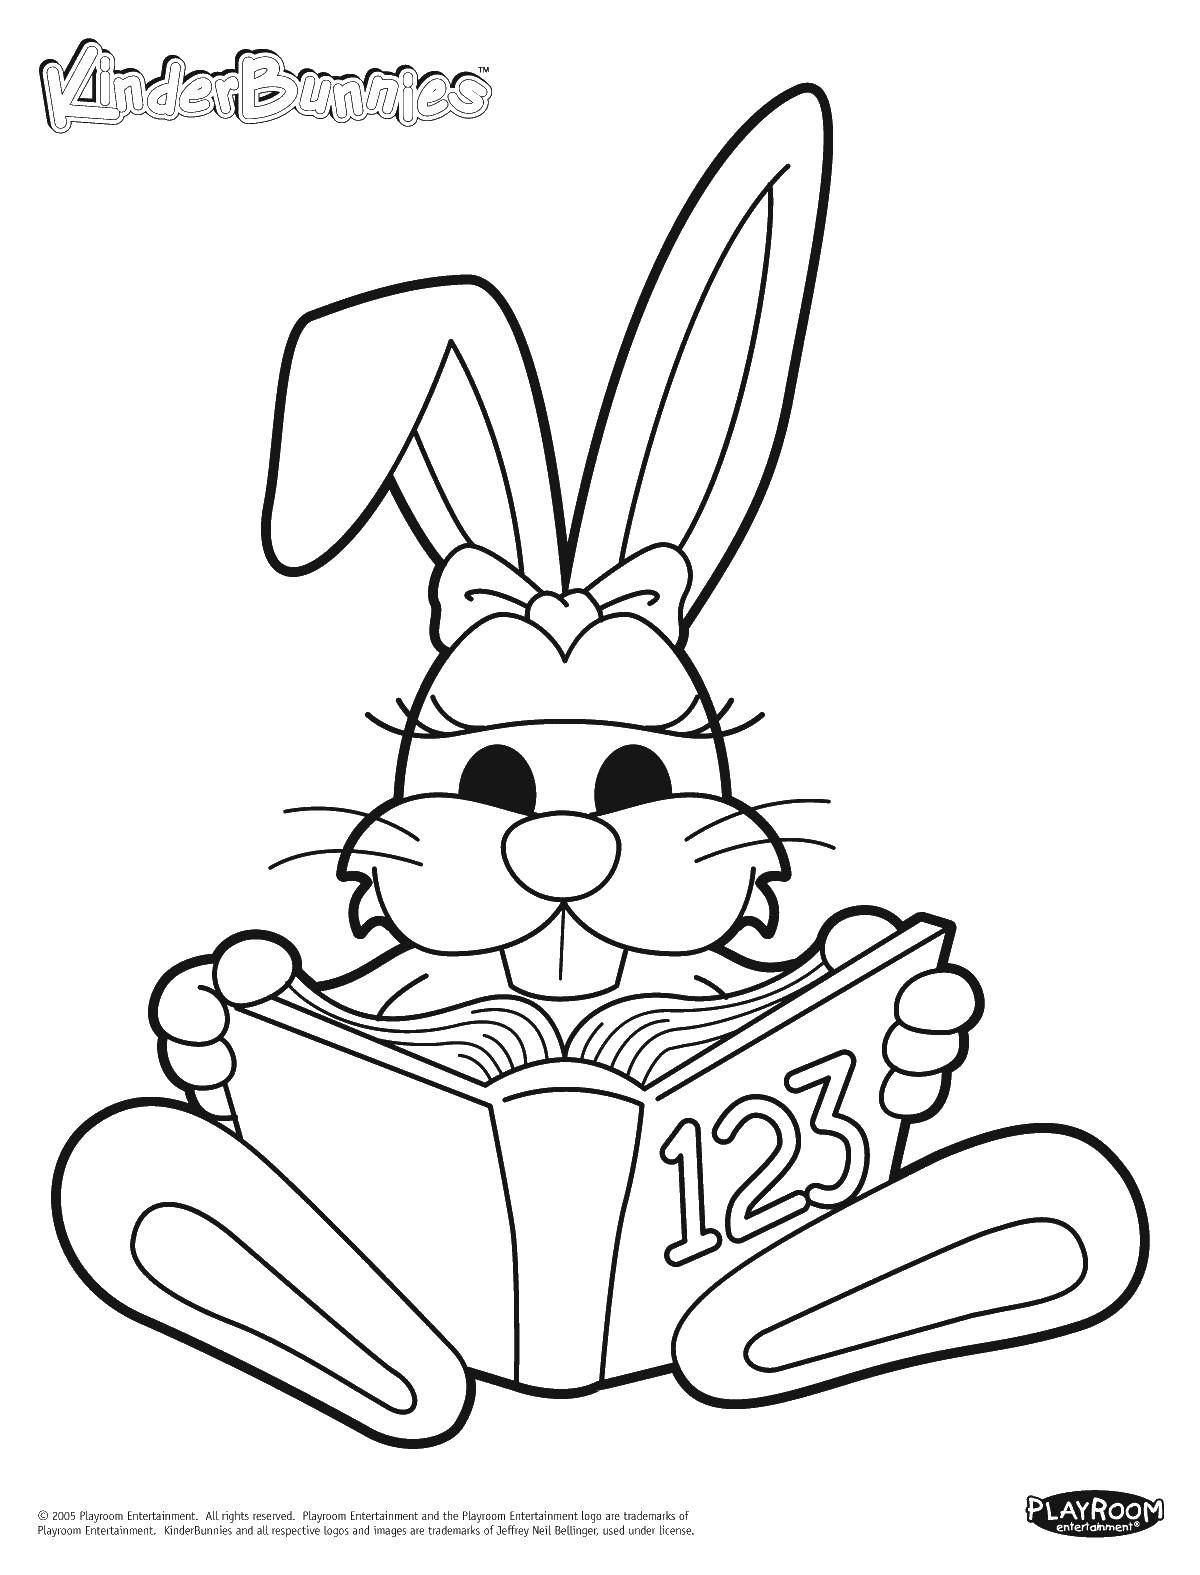 Coloring Bunny studying mathematics. Category mathematical coloring pages. Tags:  Animals, Bunny.